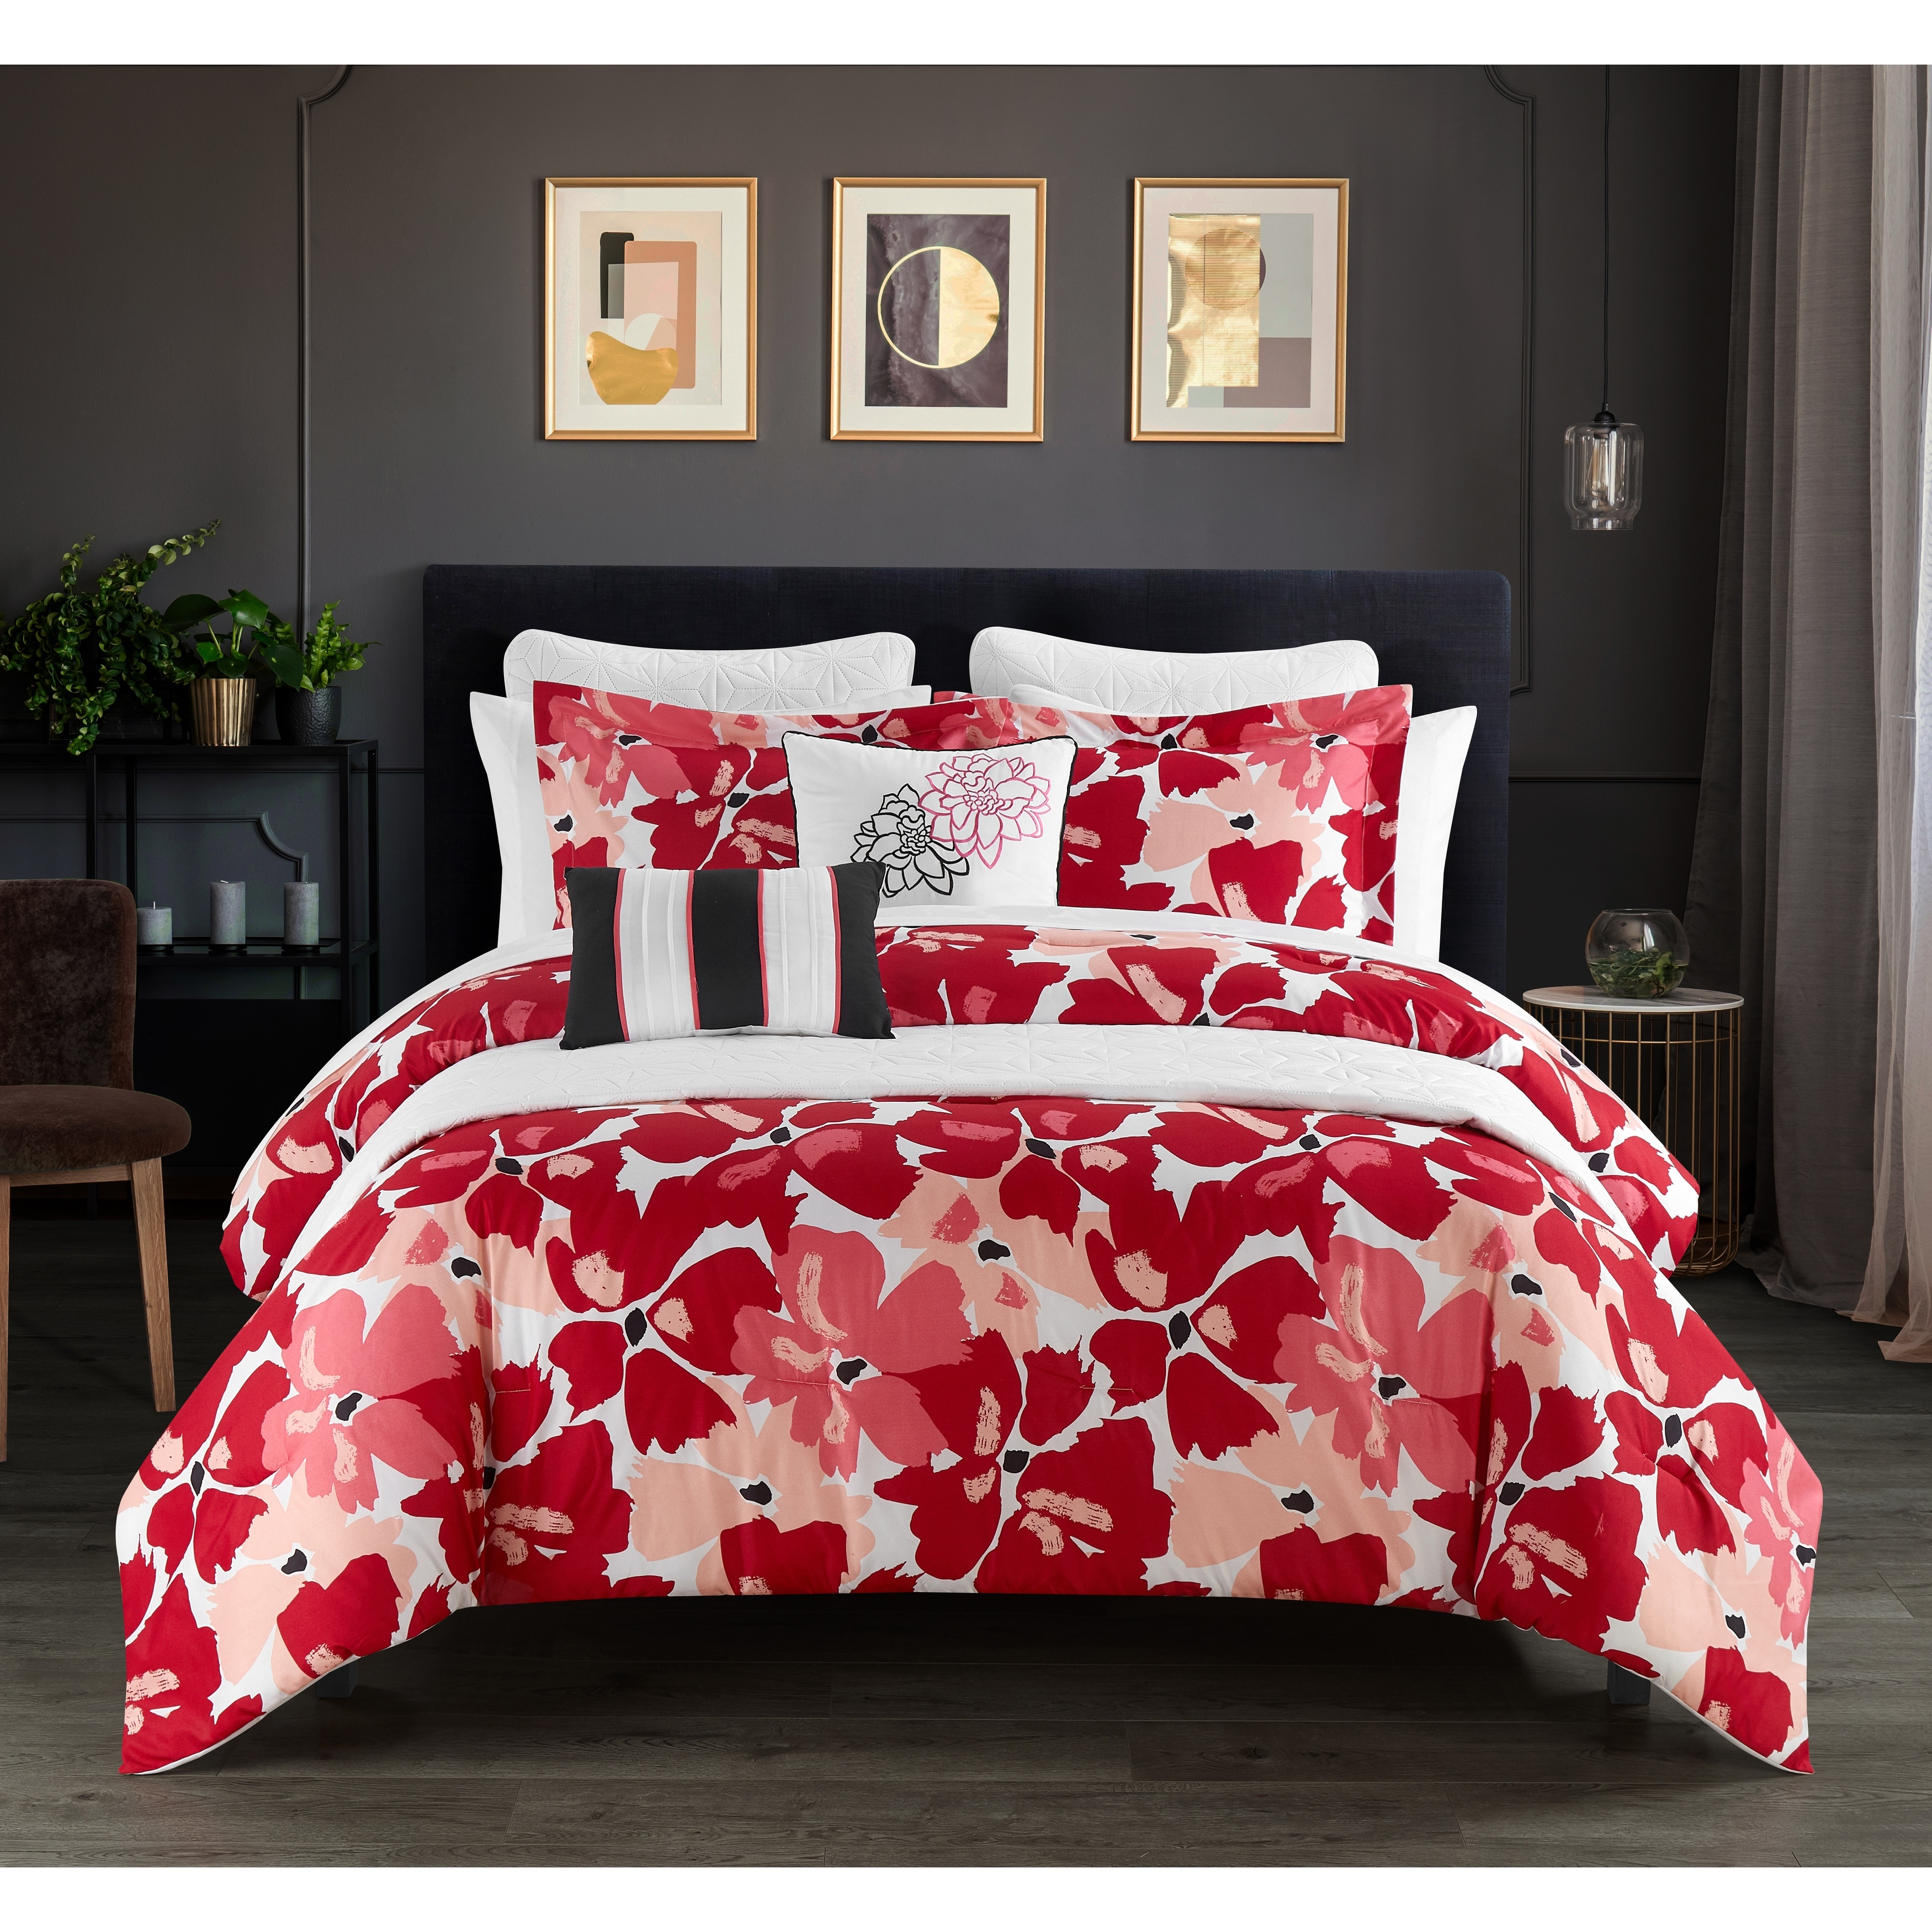 Chic Home Lia 12 Piece Comforter And Quilt Set Contemporary Floral Print  Bed In A Bag